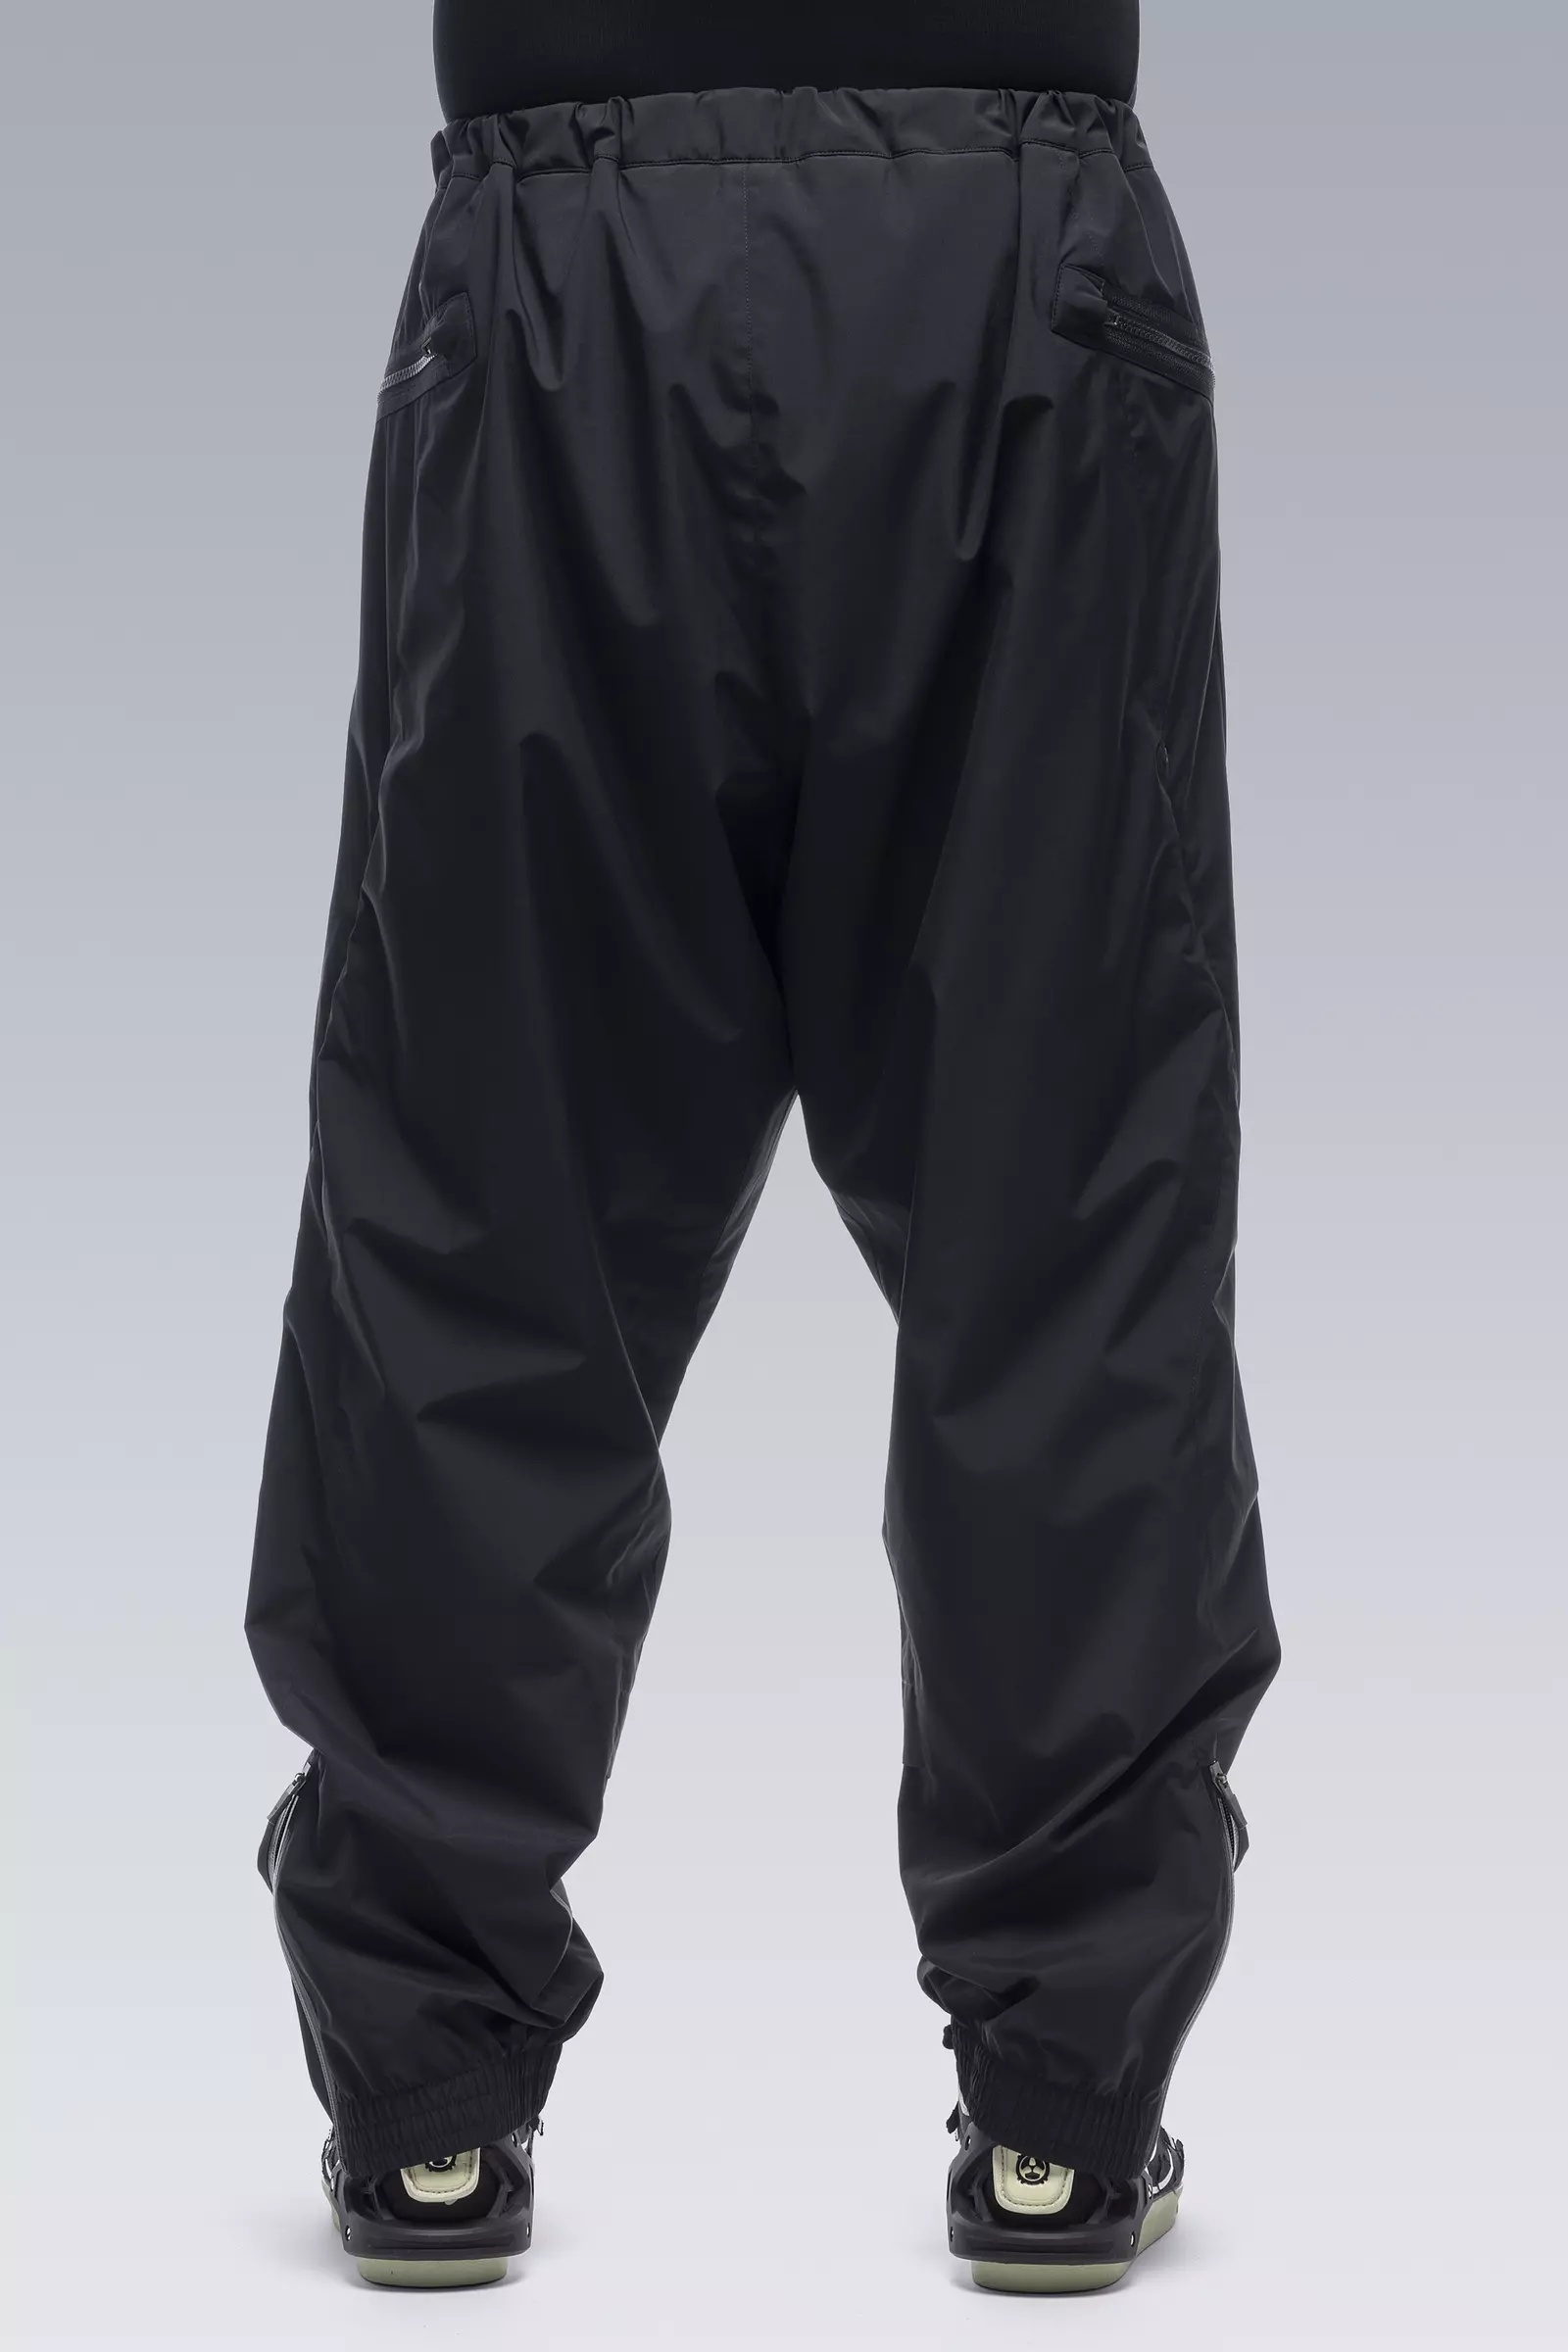 P53-WS 2L Gore-Tex® Windstopper® Insulated Vent Pants Black - 7